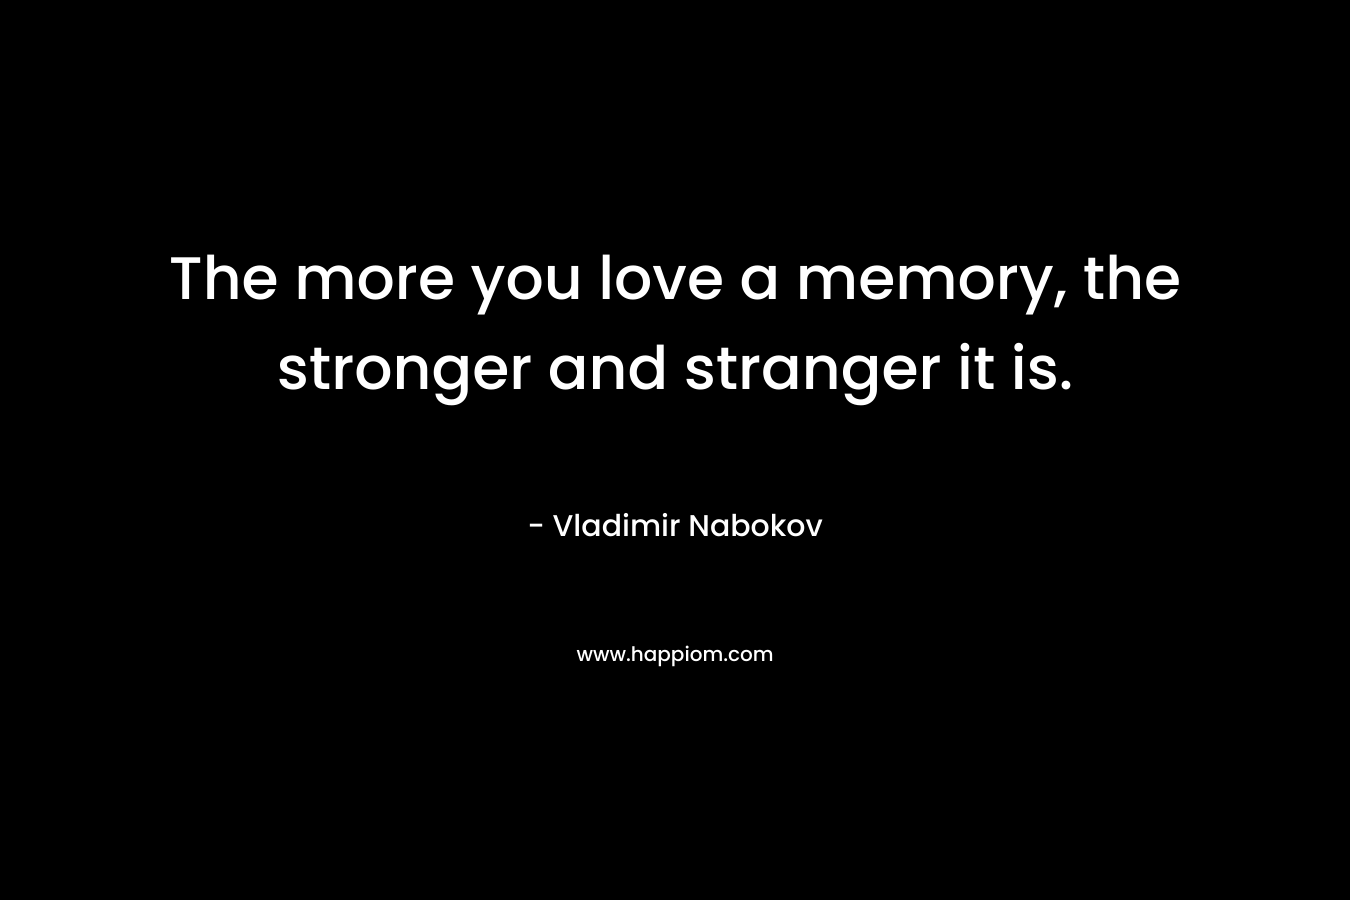 The more you love a memory, the stronger and stranger it is.